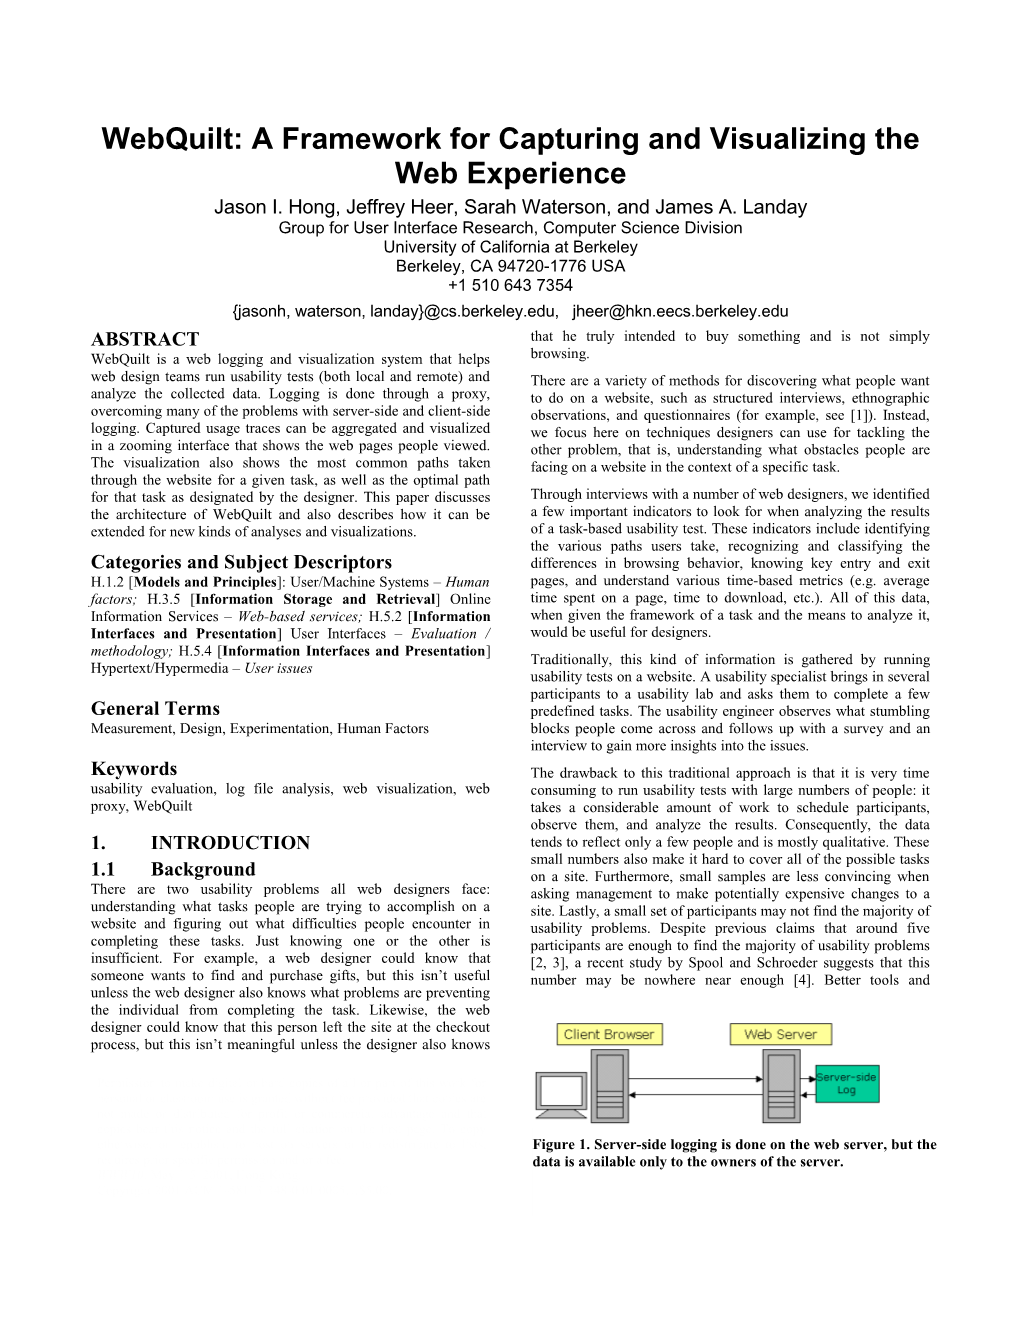 Webquilt: a Framework for Capturing and Visualizing the Web Experience